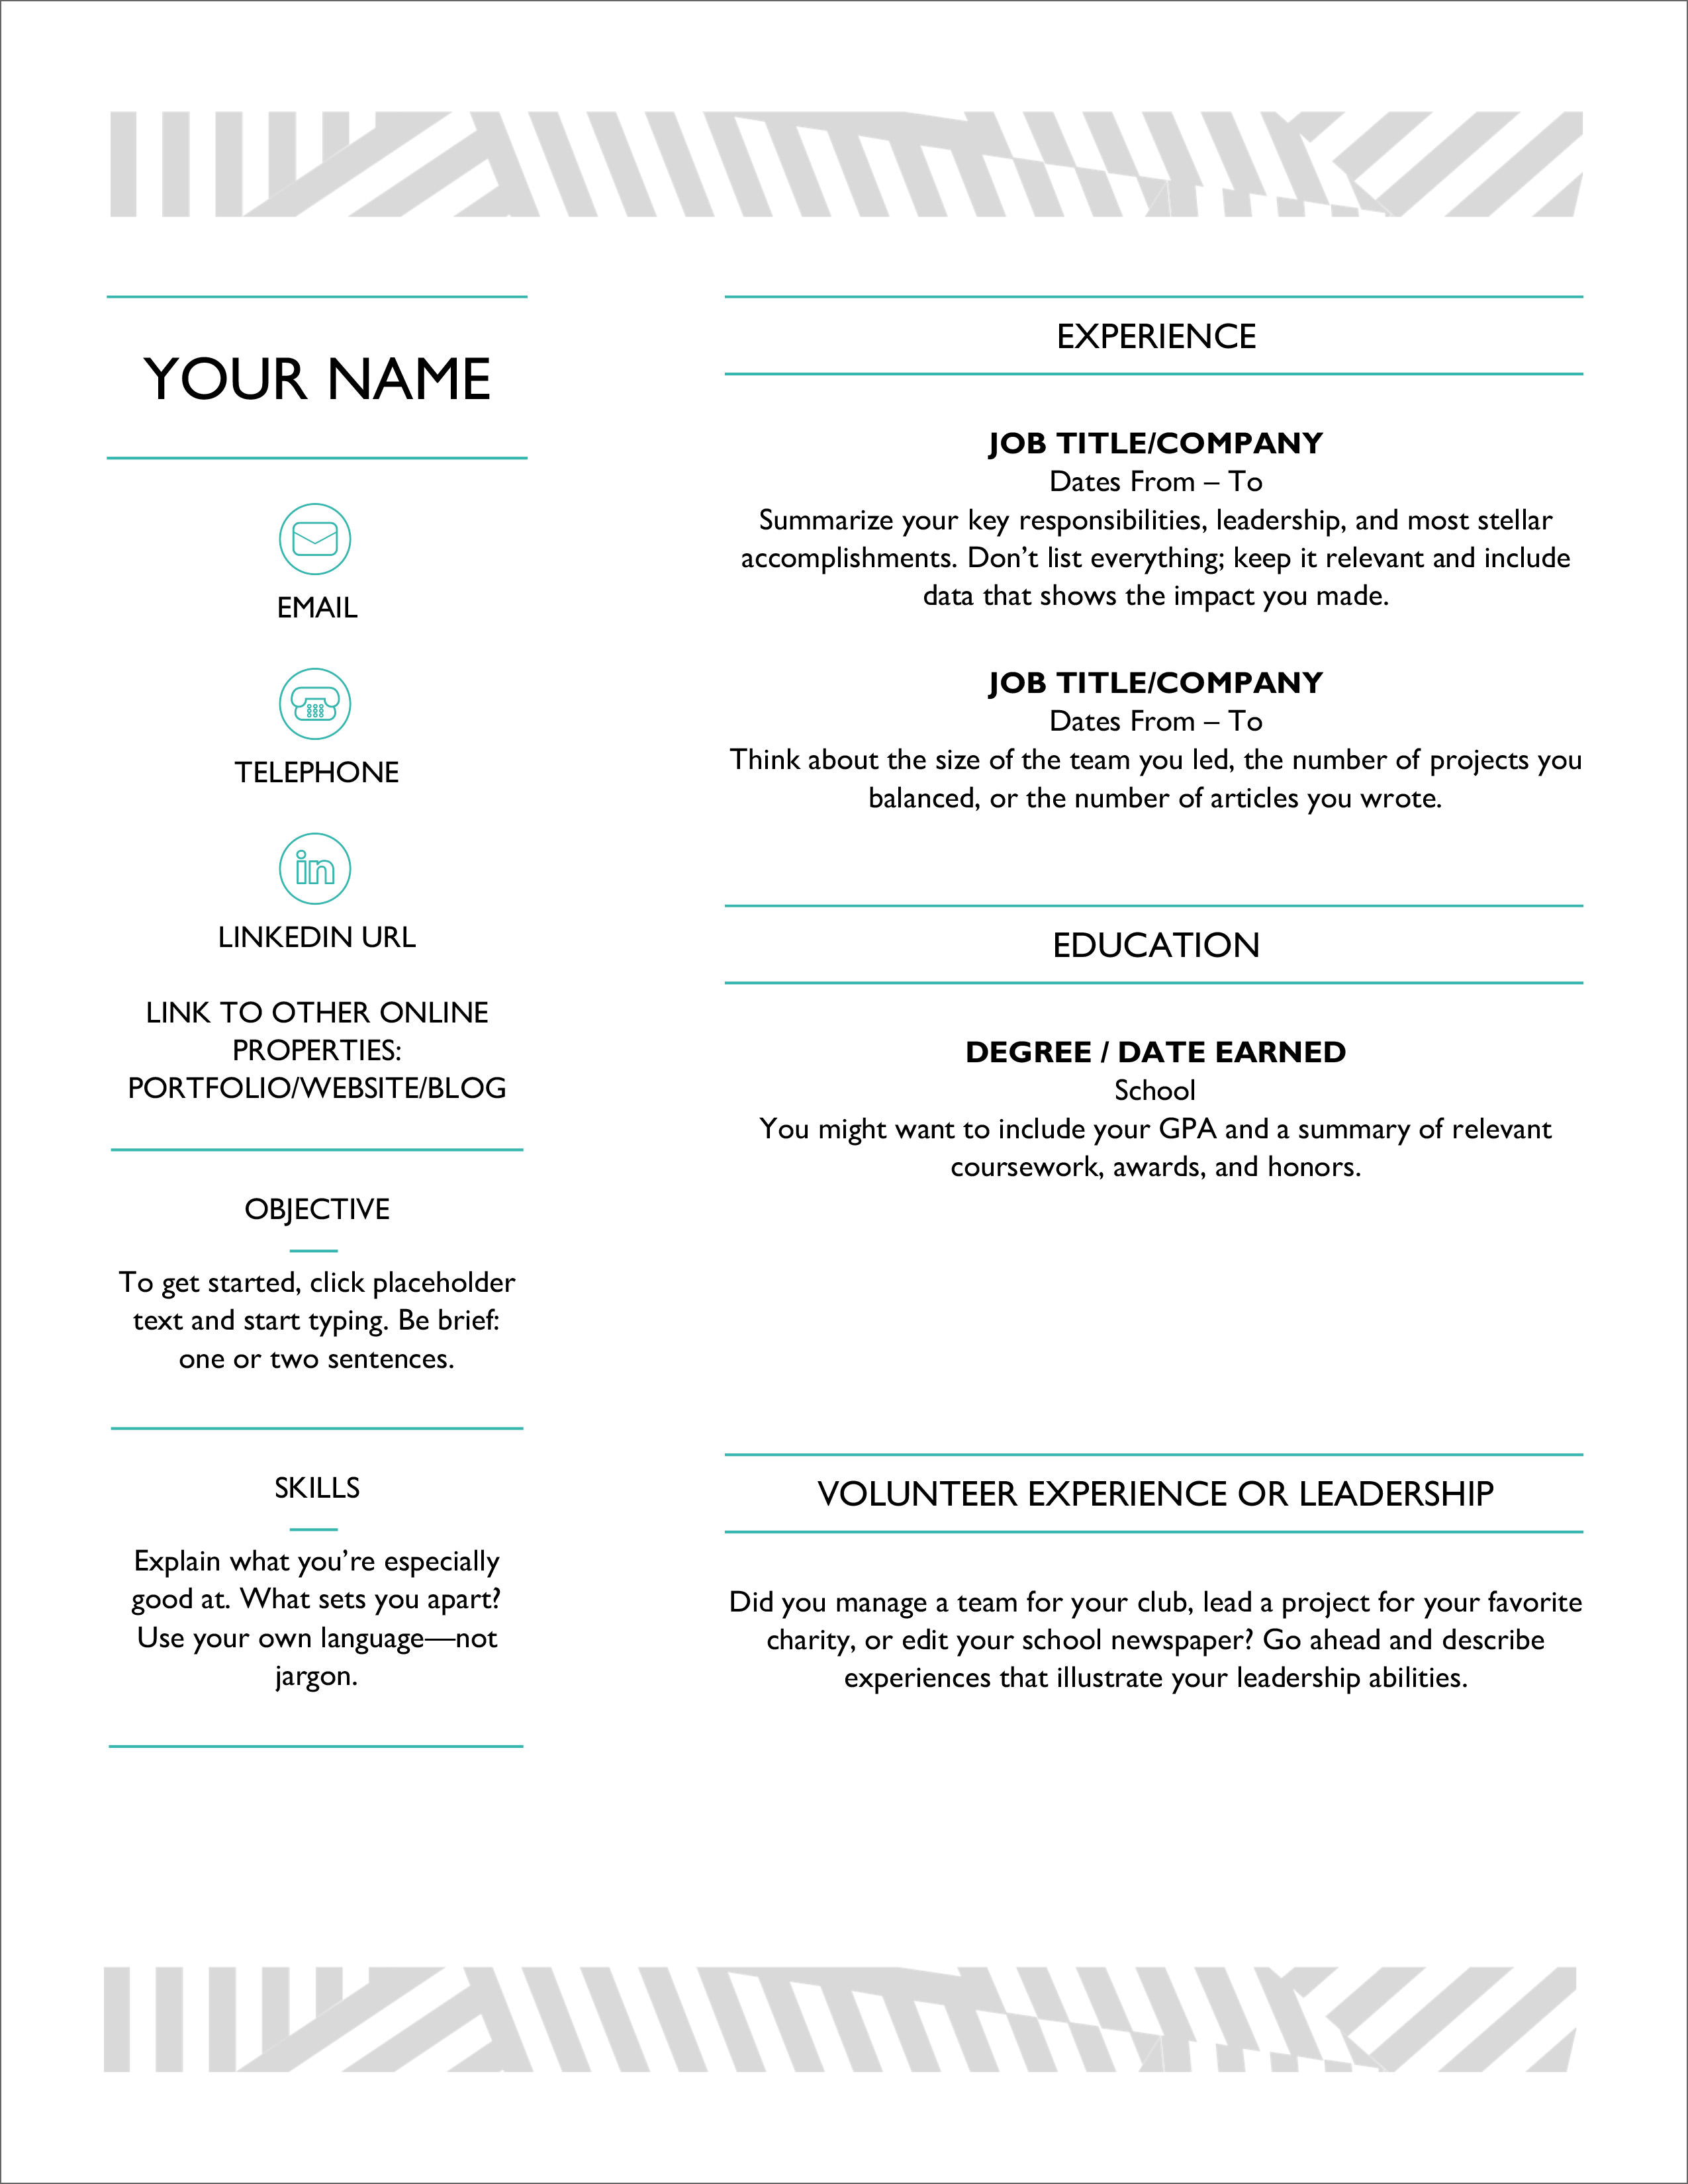 diploma fresher resume format download in ms word   5